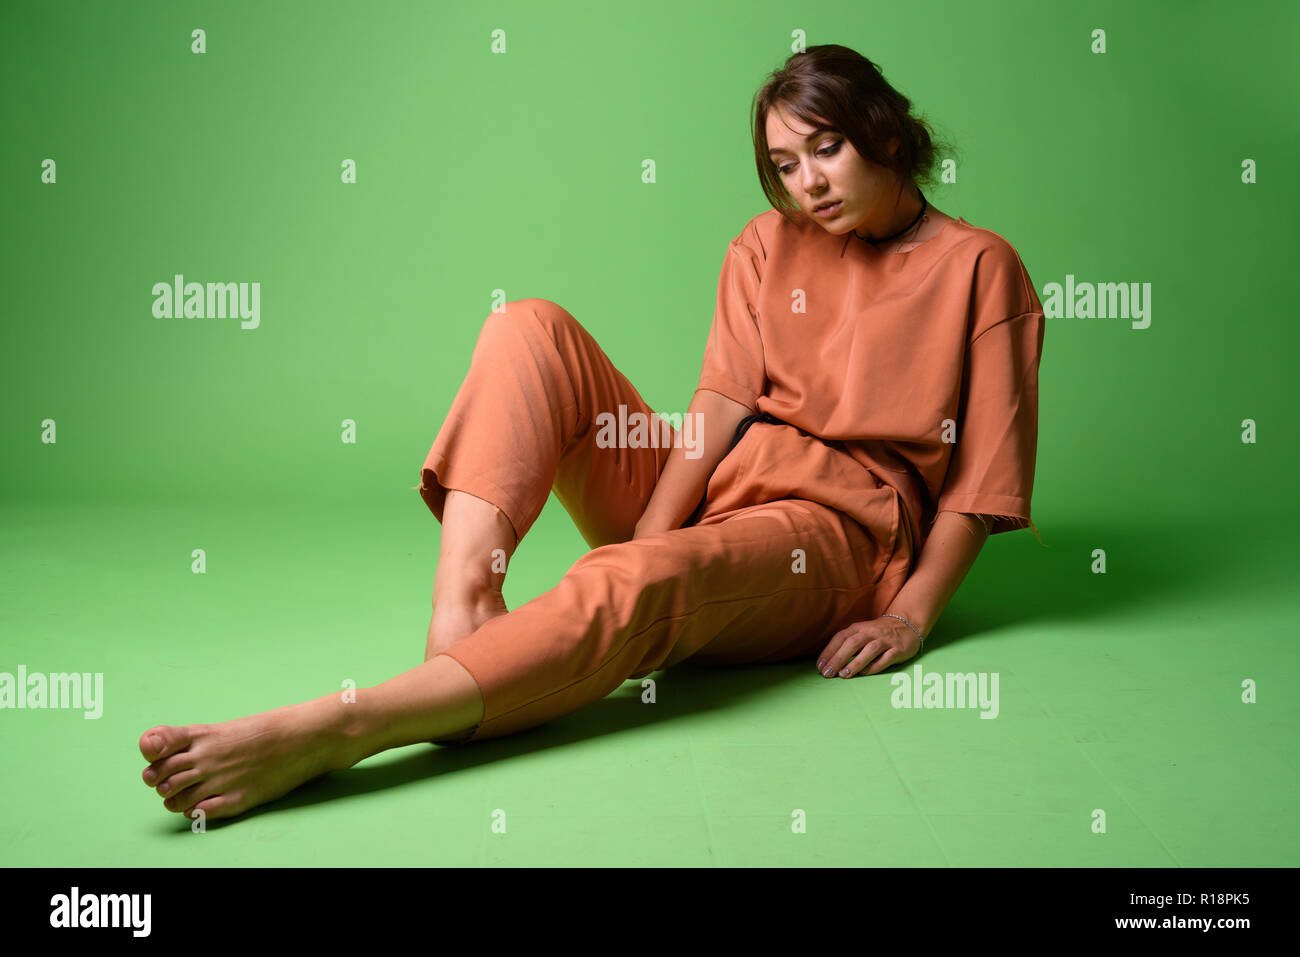 Studio shot of young beautiful woman against green background Stock Photo